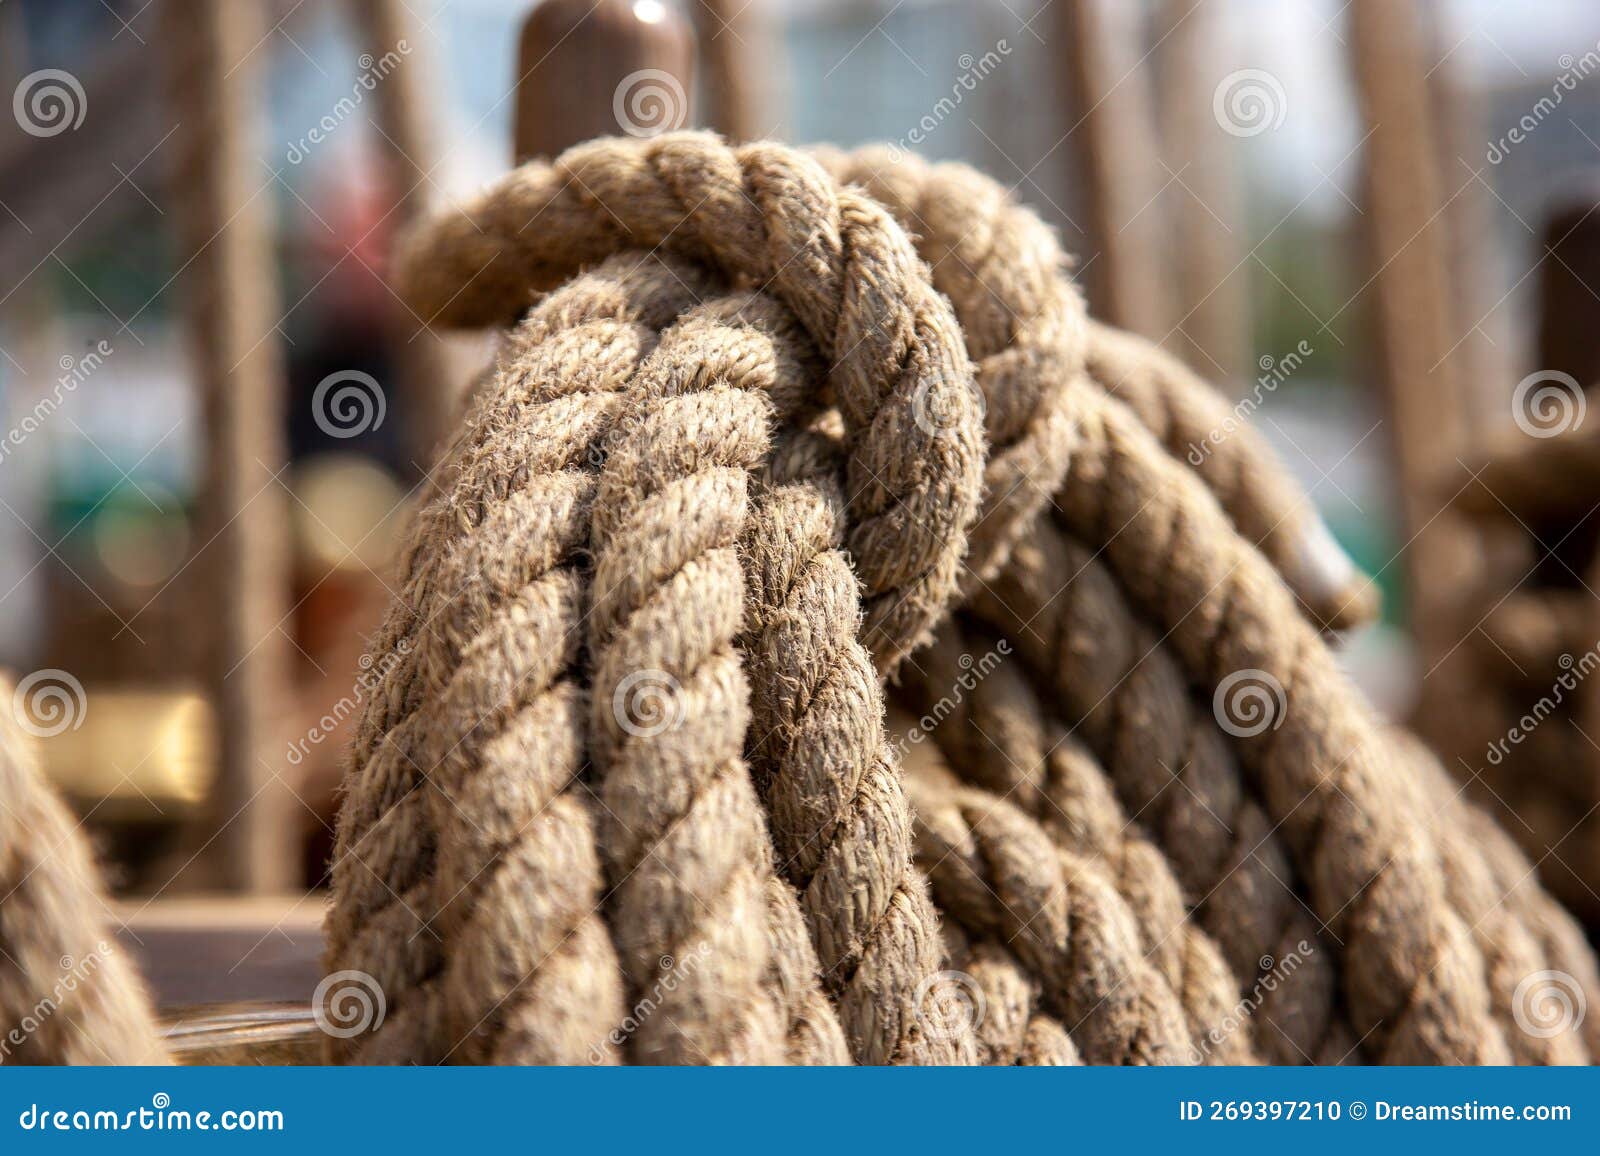 Strong Ropes for Sailing Hanging on a Wooden Pole Stock Photo - Image of  knot, wooden: 269397210